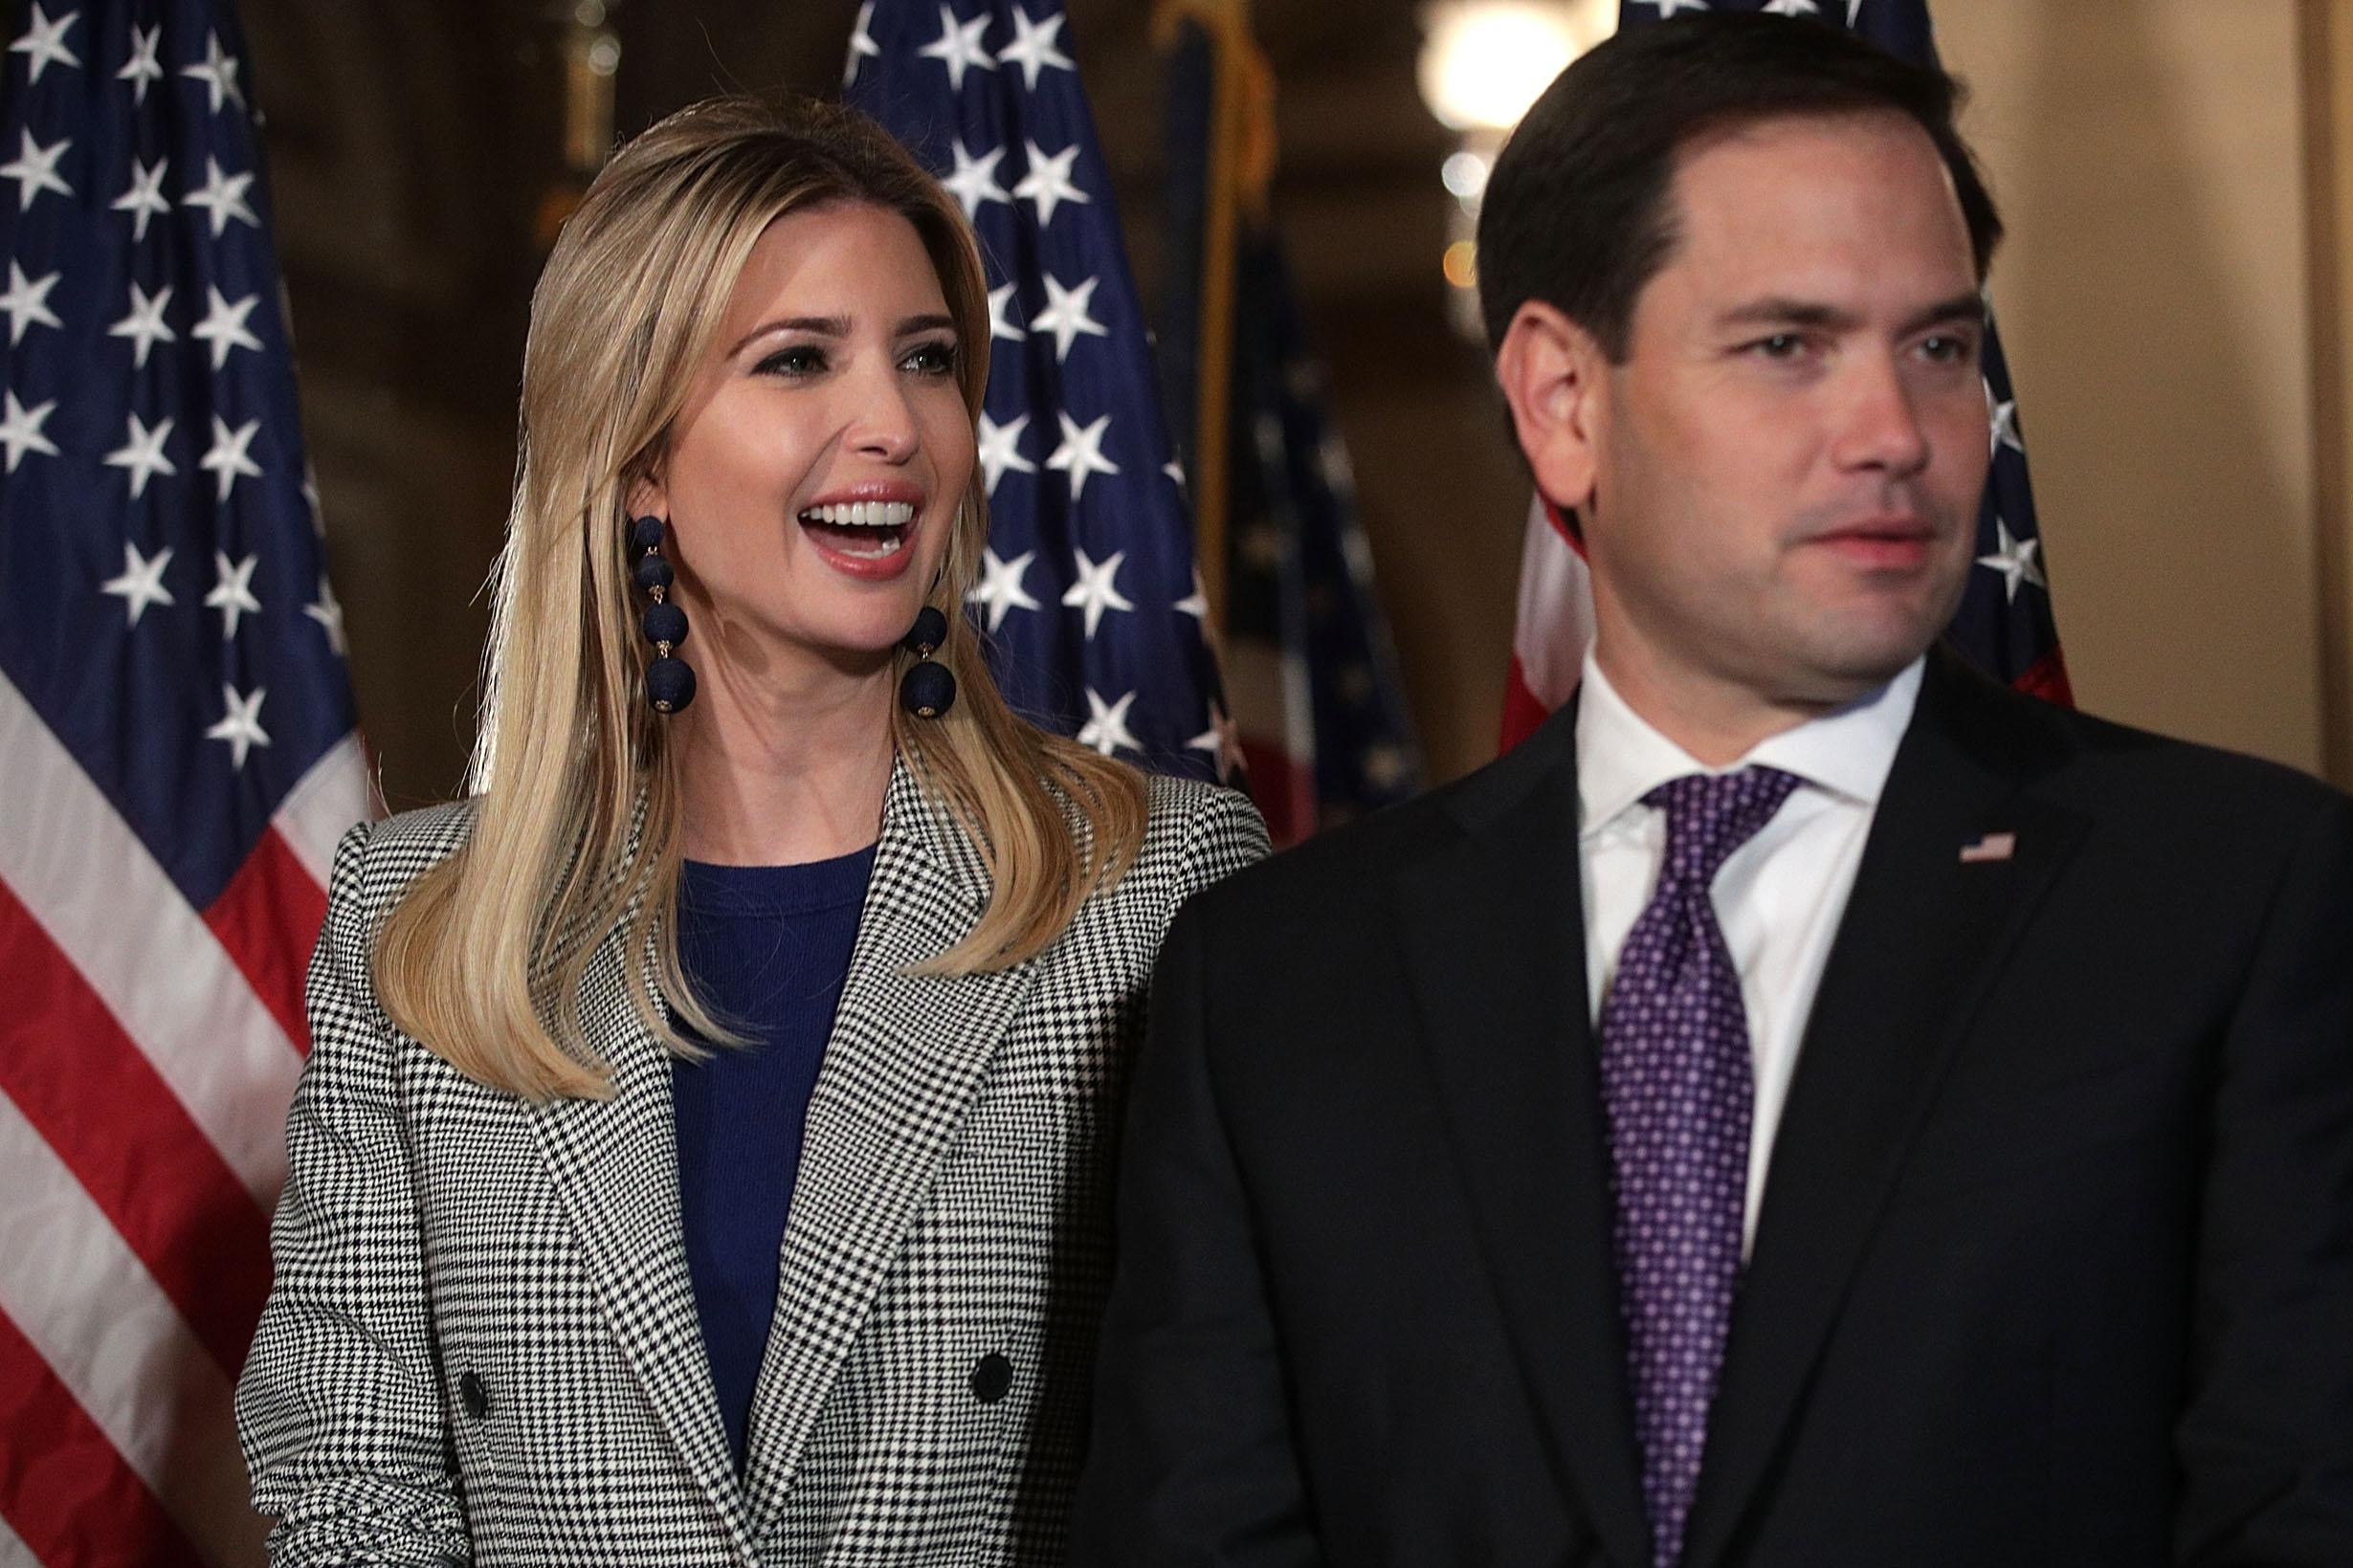 Sen. Marco Rubio and Ivanka Trump attend a news conference October 25, 2017 at the Capitol in Washington, D.C.